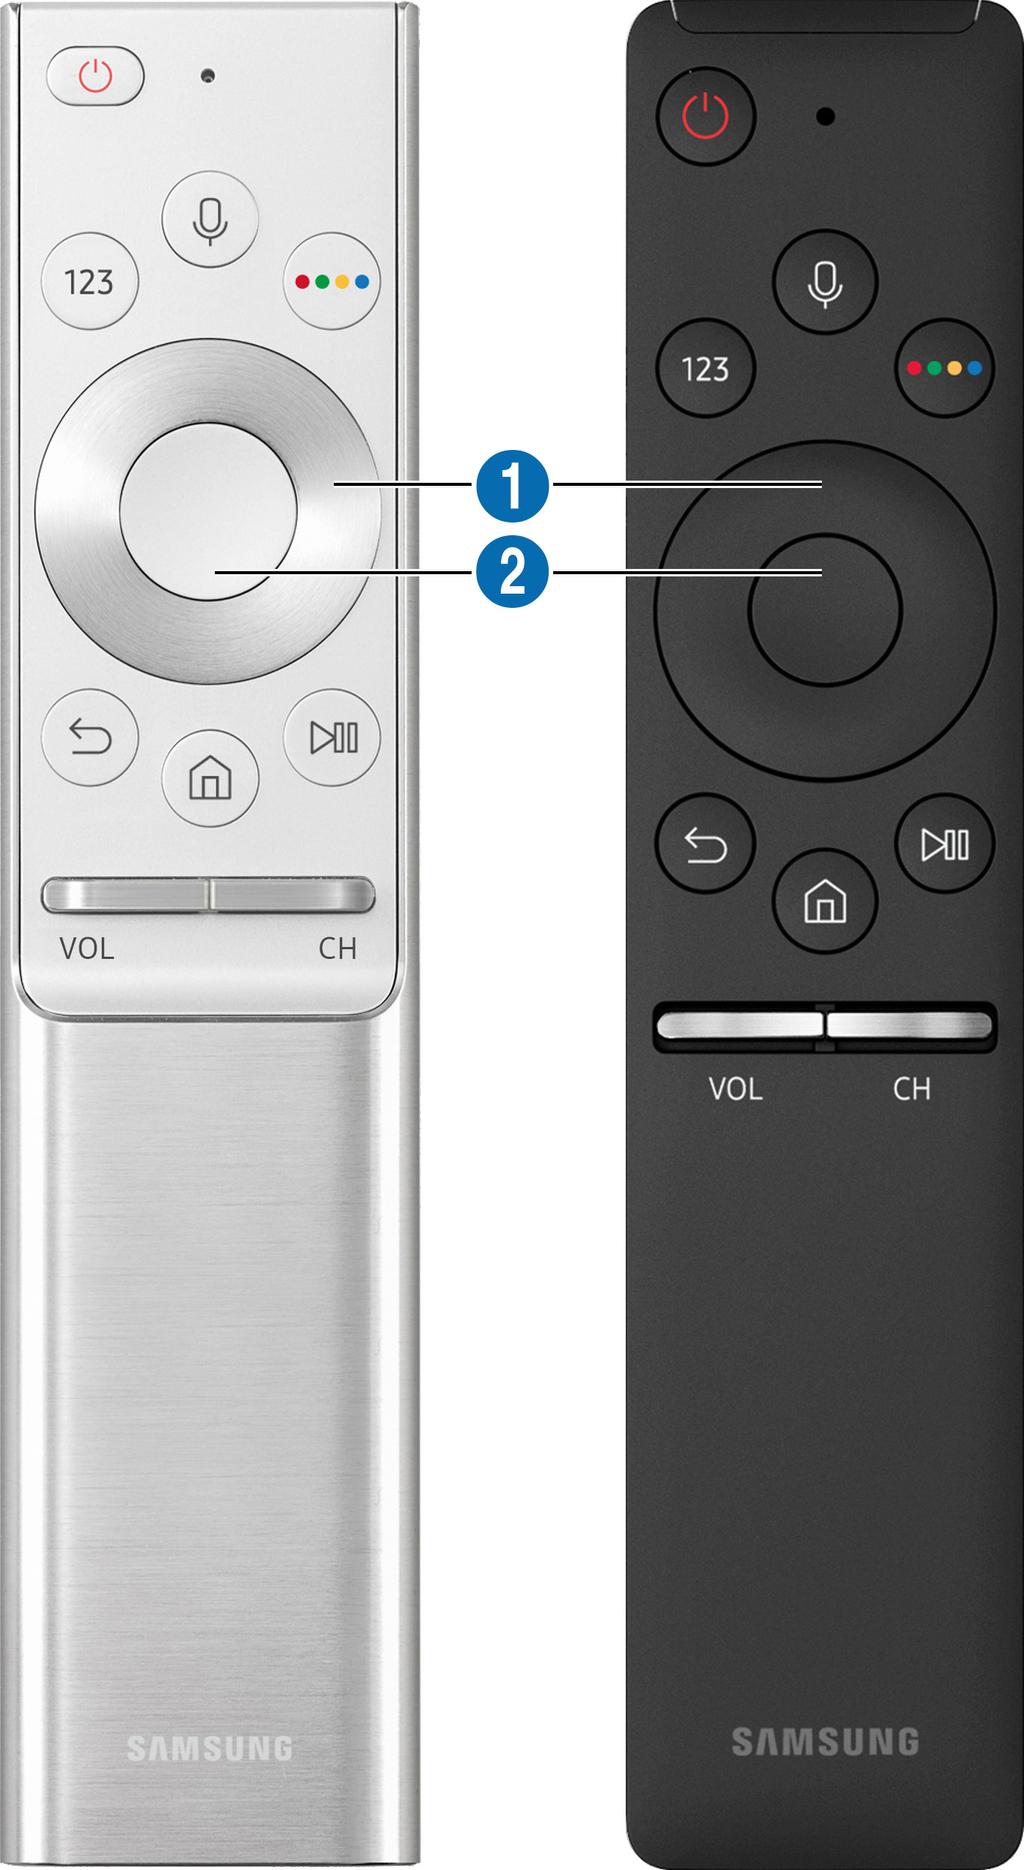 About the Samsung Smart Remote (UHD TV) Learn about the